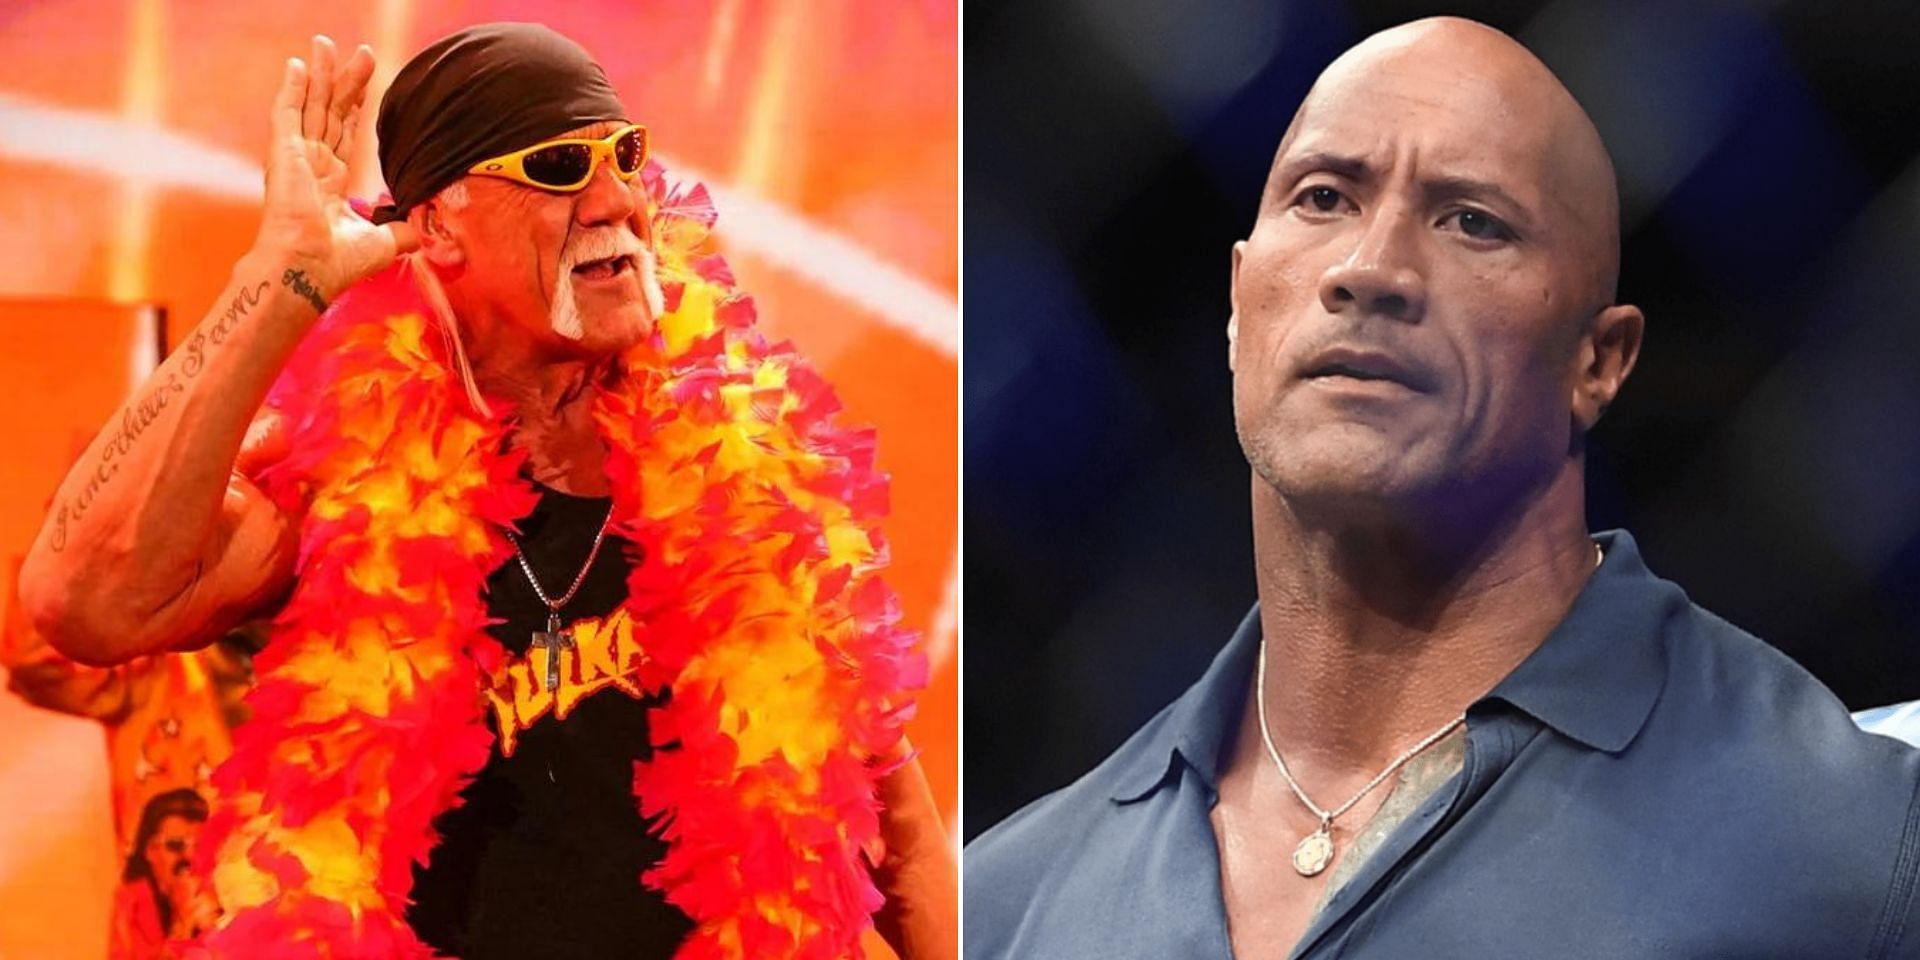 The Rock has been compared to WWE Hall of Famer Hulk Hogan